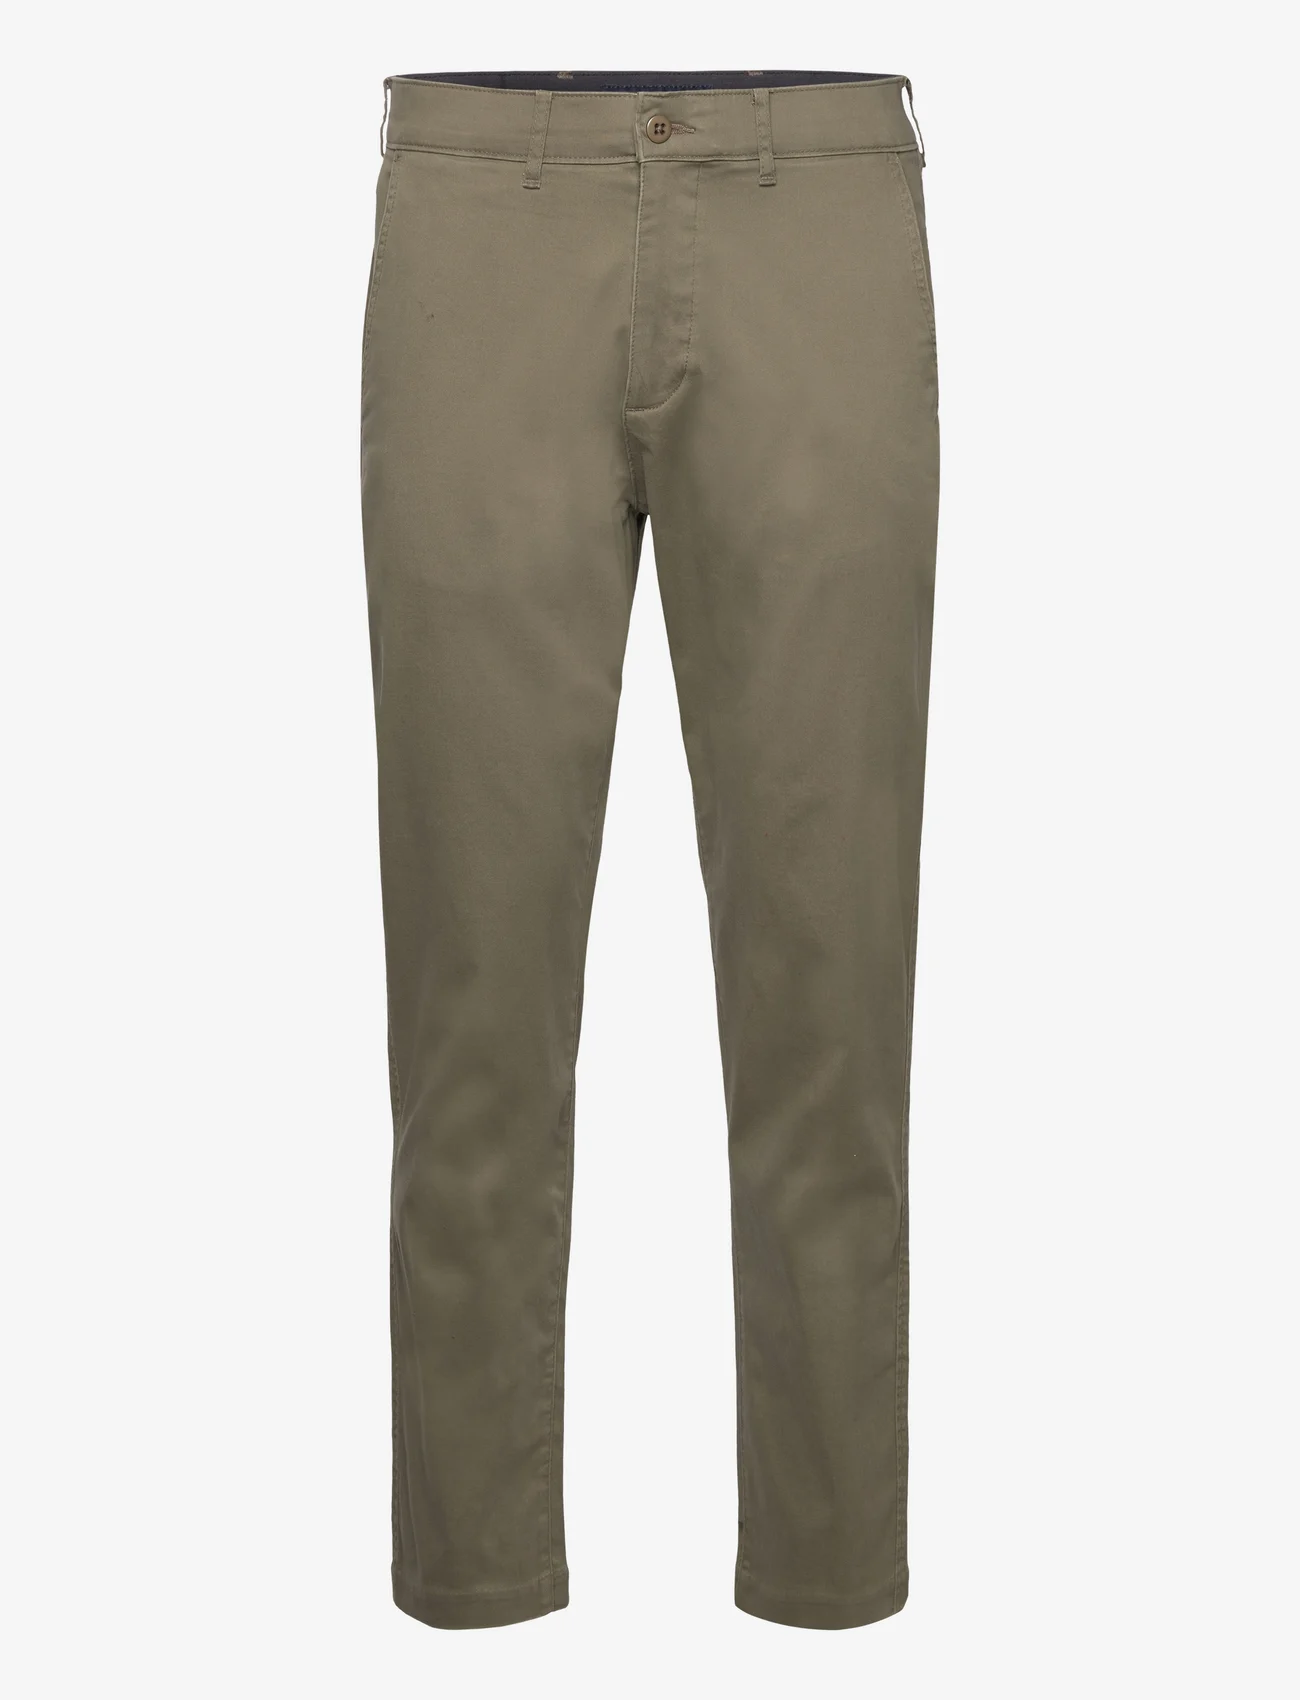 Abercrombie & Fitch - ANF MENS PANTS - chinos - grape leaf - 0